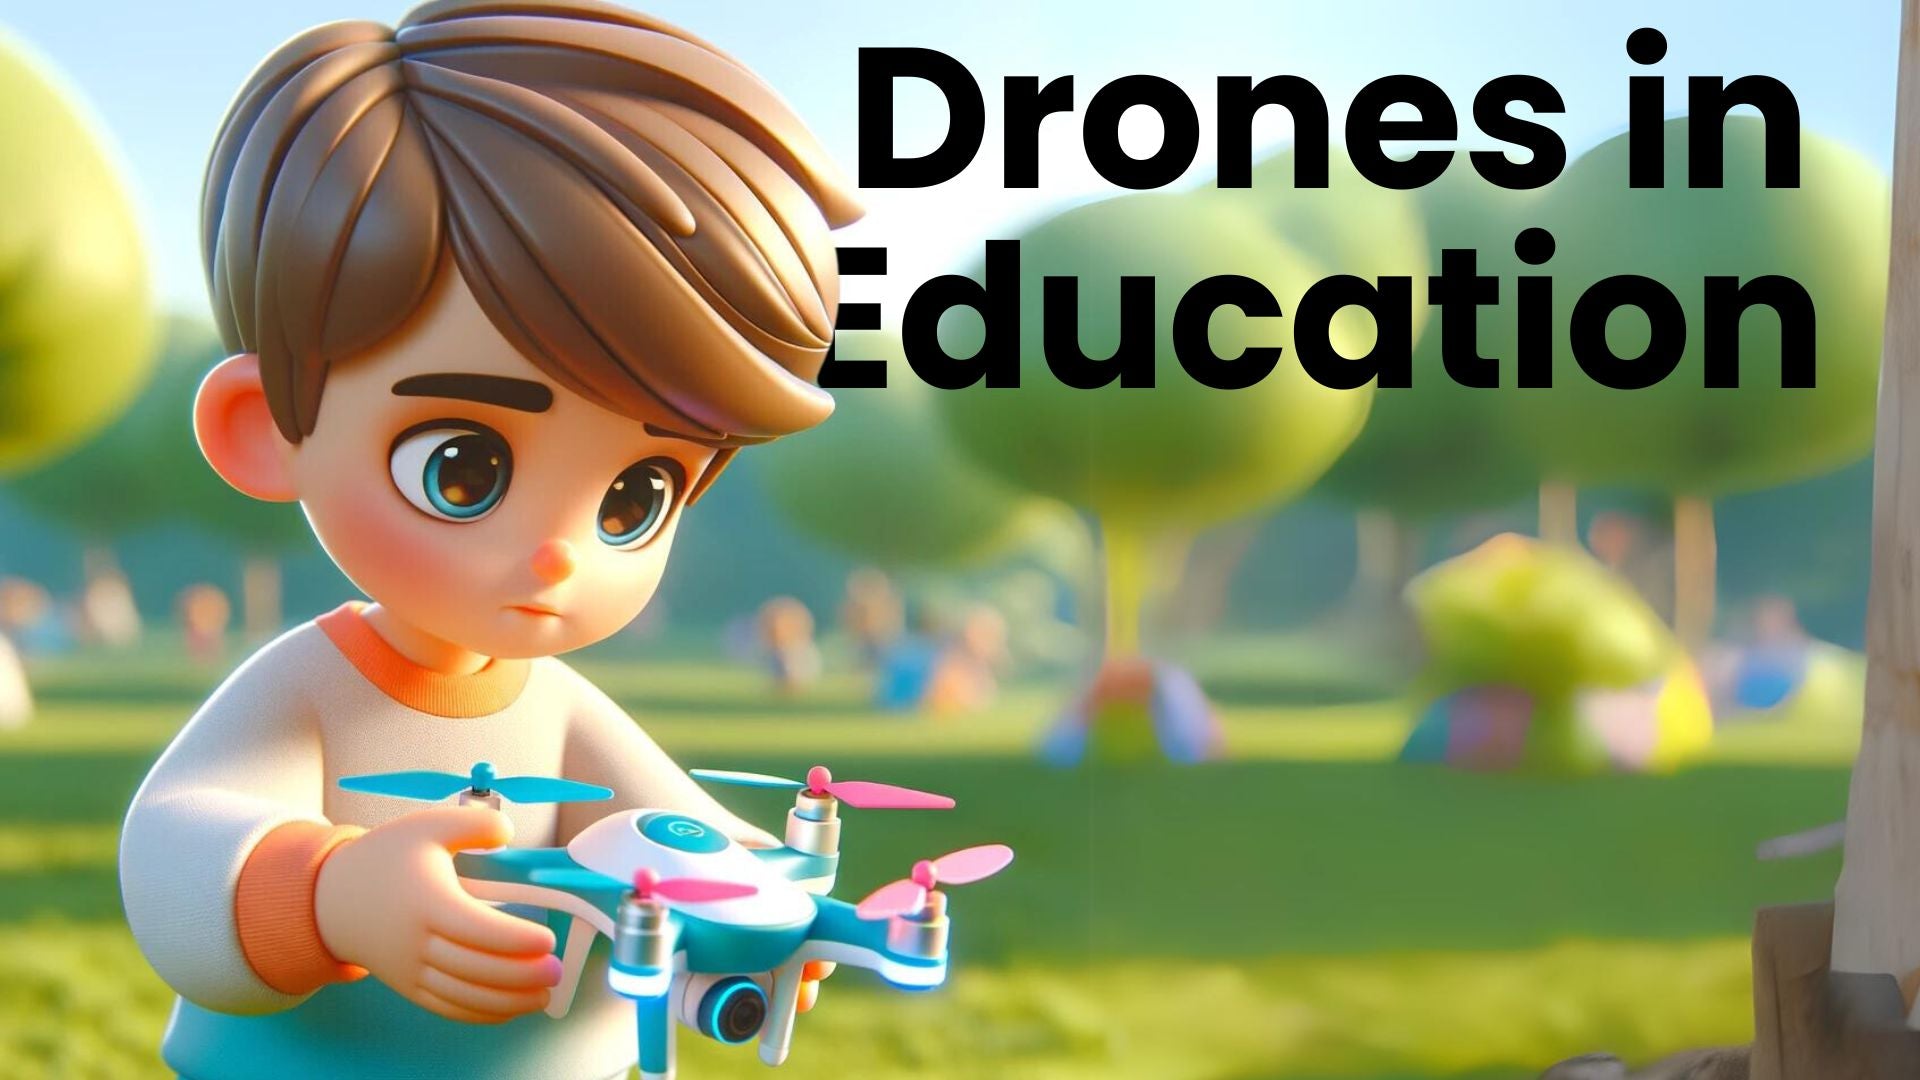 Drones in Education: Learning with Flying Robots